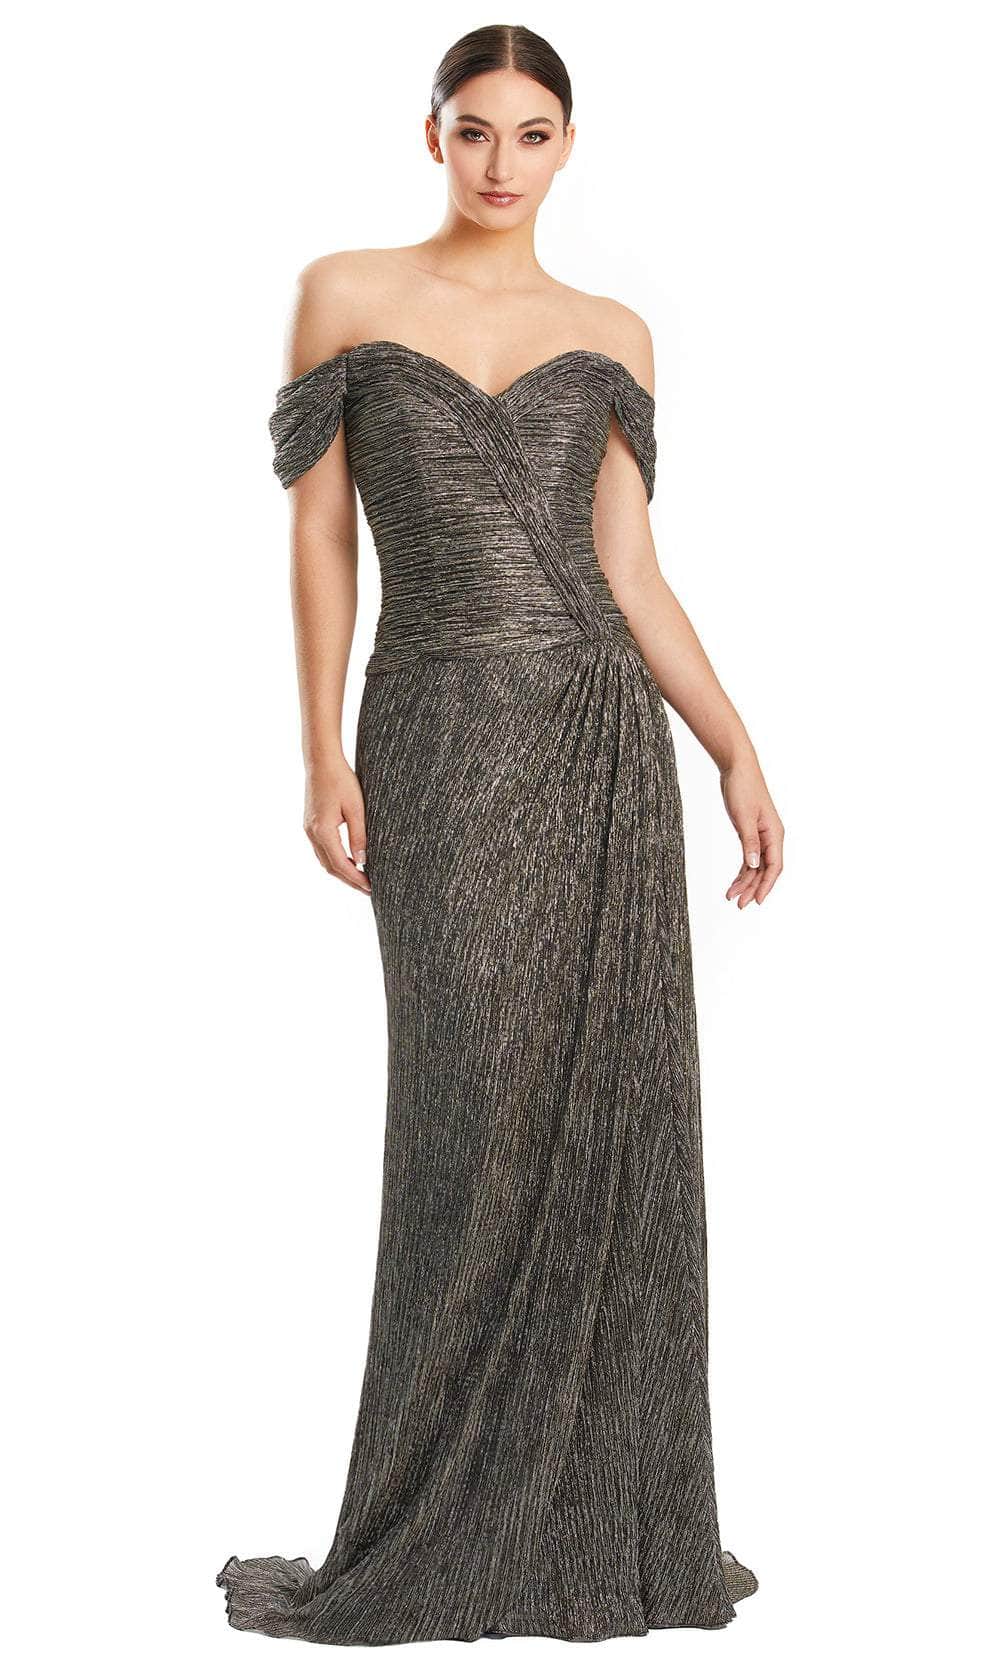 Alexander by Daymor 1858F23 - Ruched Prom Dress 00 / Bronze